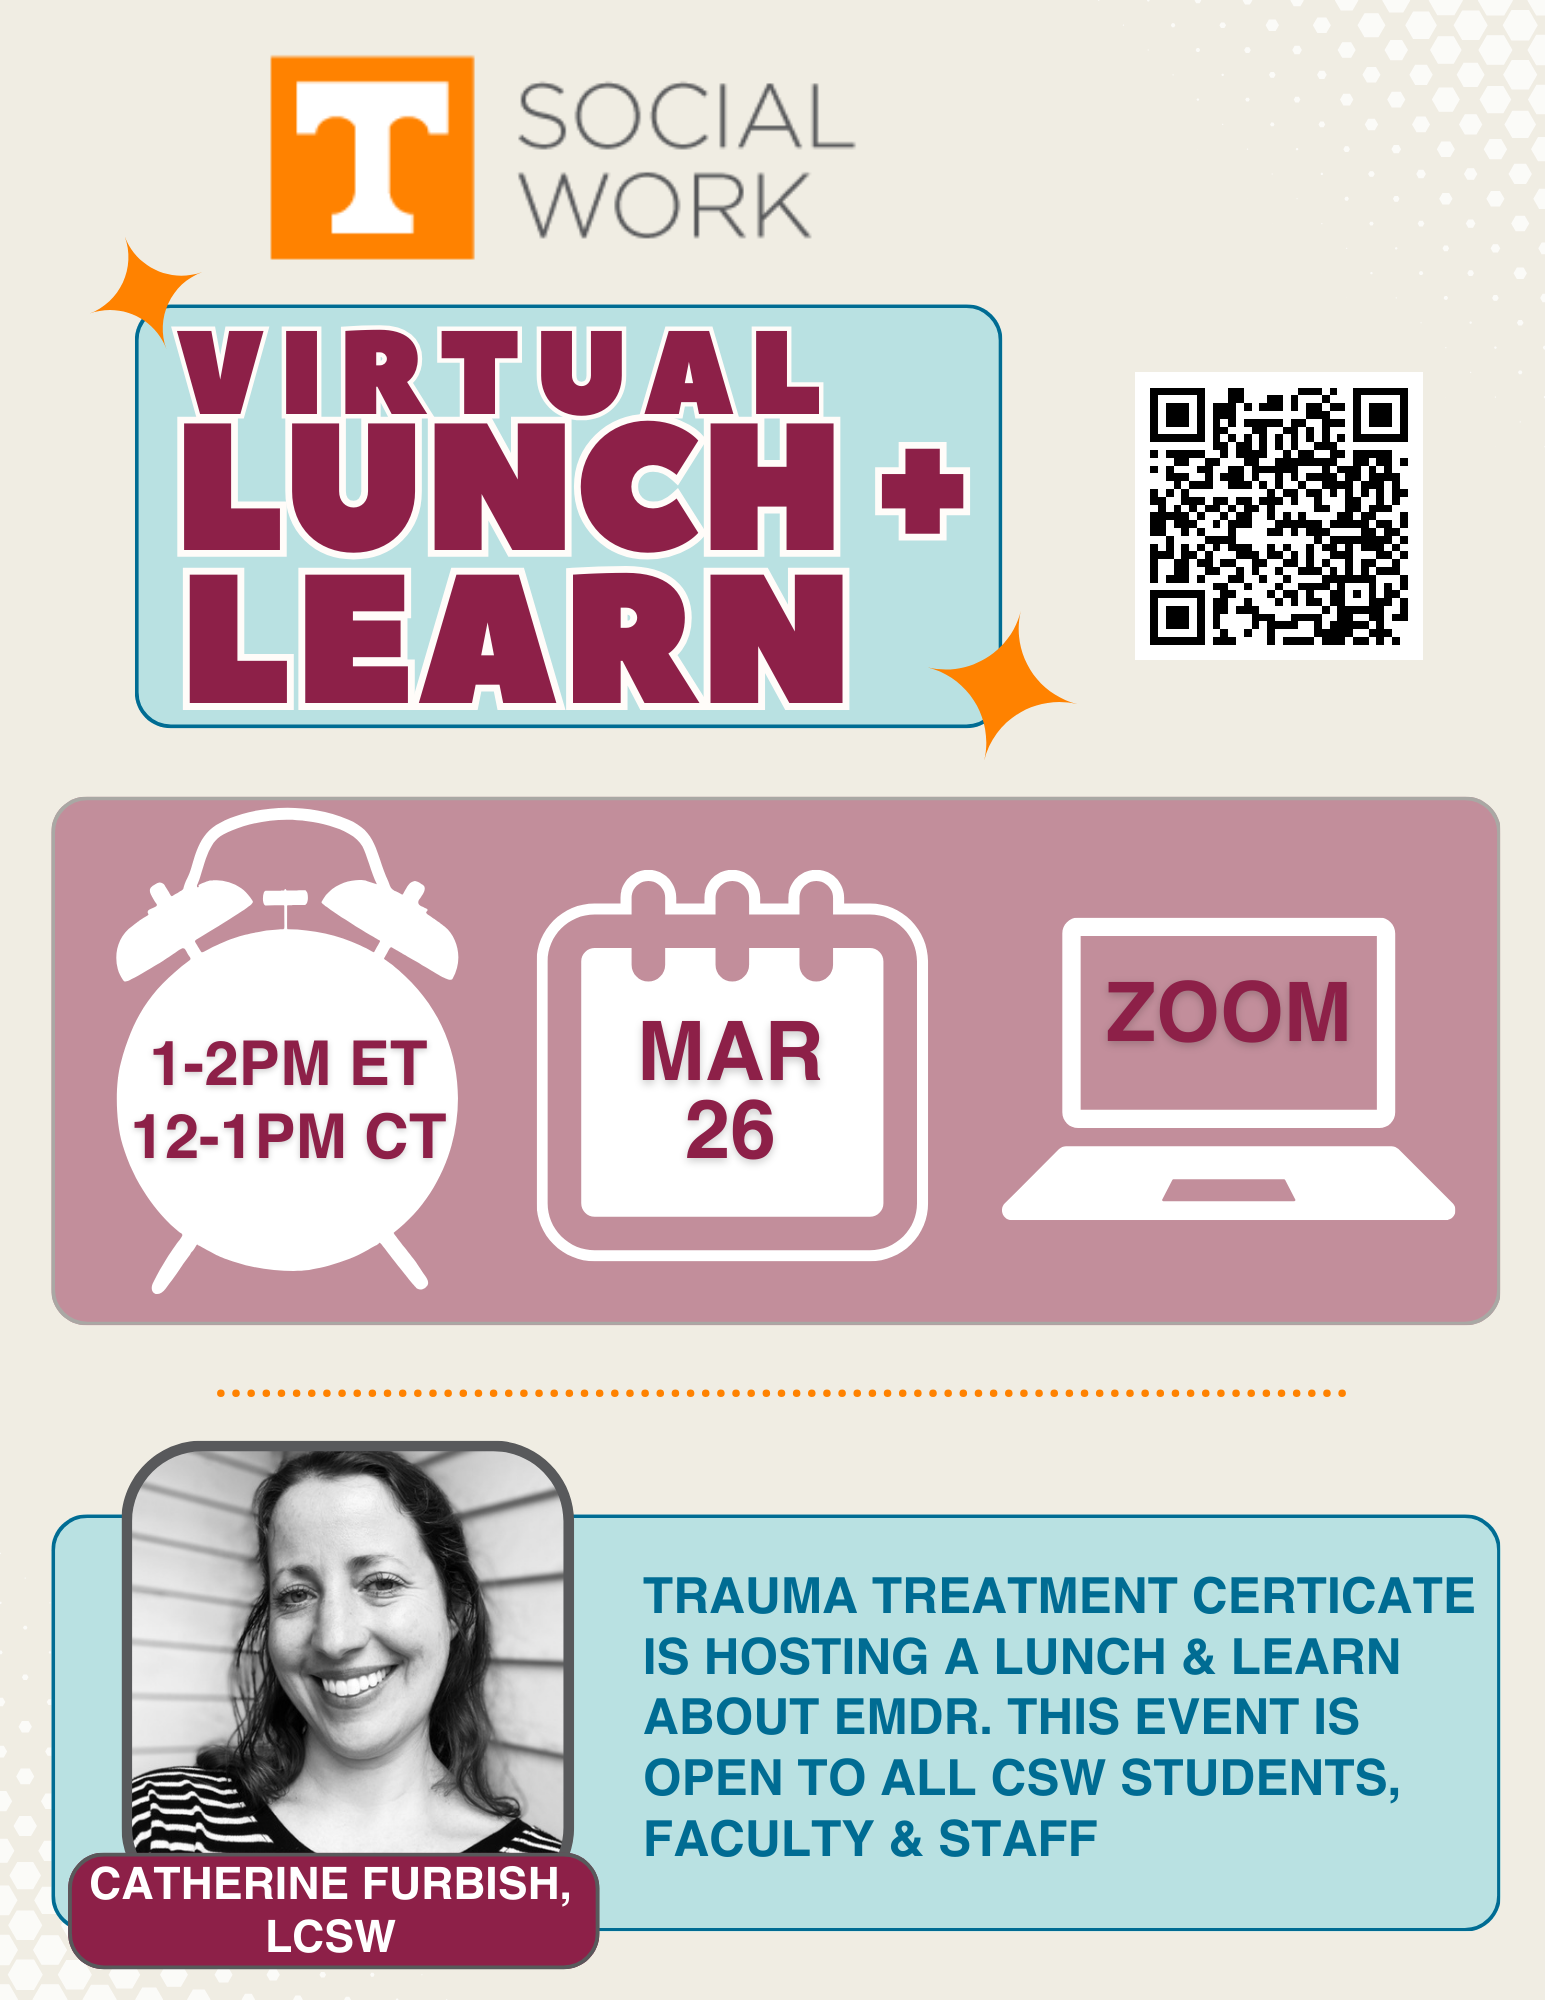 Lunch and Learn: EMDR with Catherine Furbish, LCSW